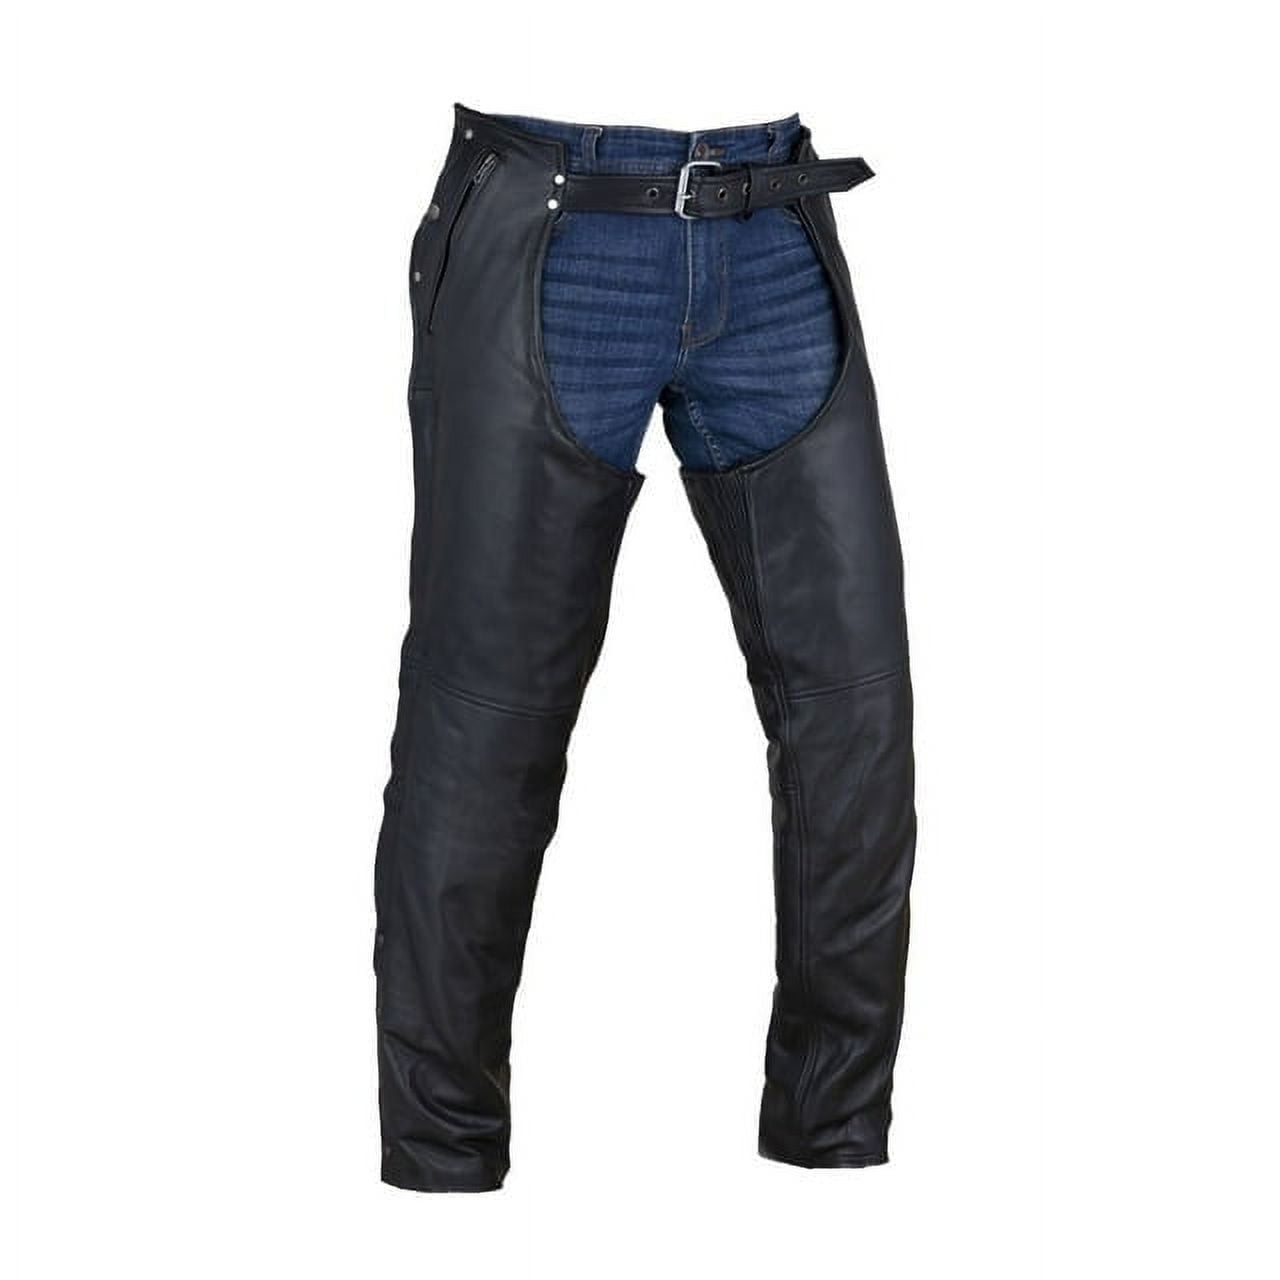 HWK Motorcycle Pants for Men and Women with Water Resistant